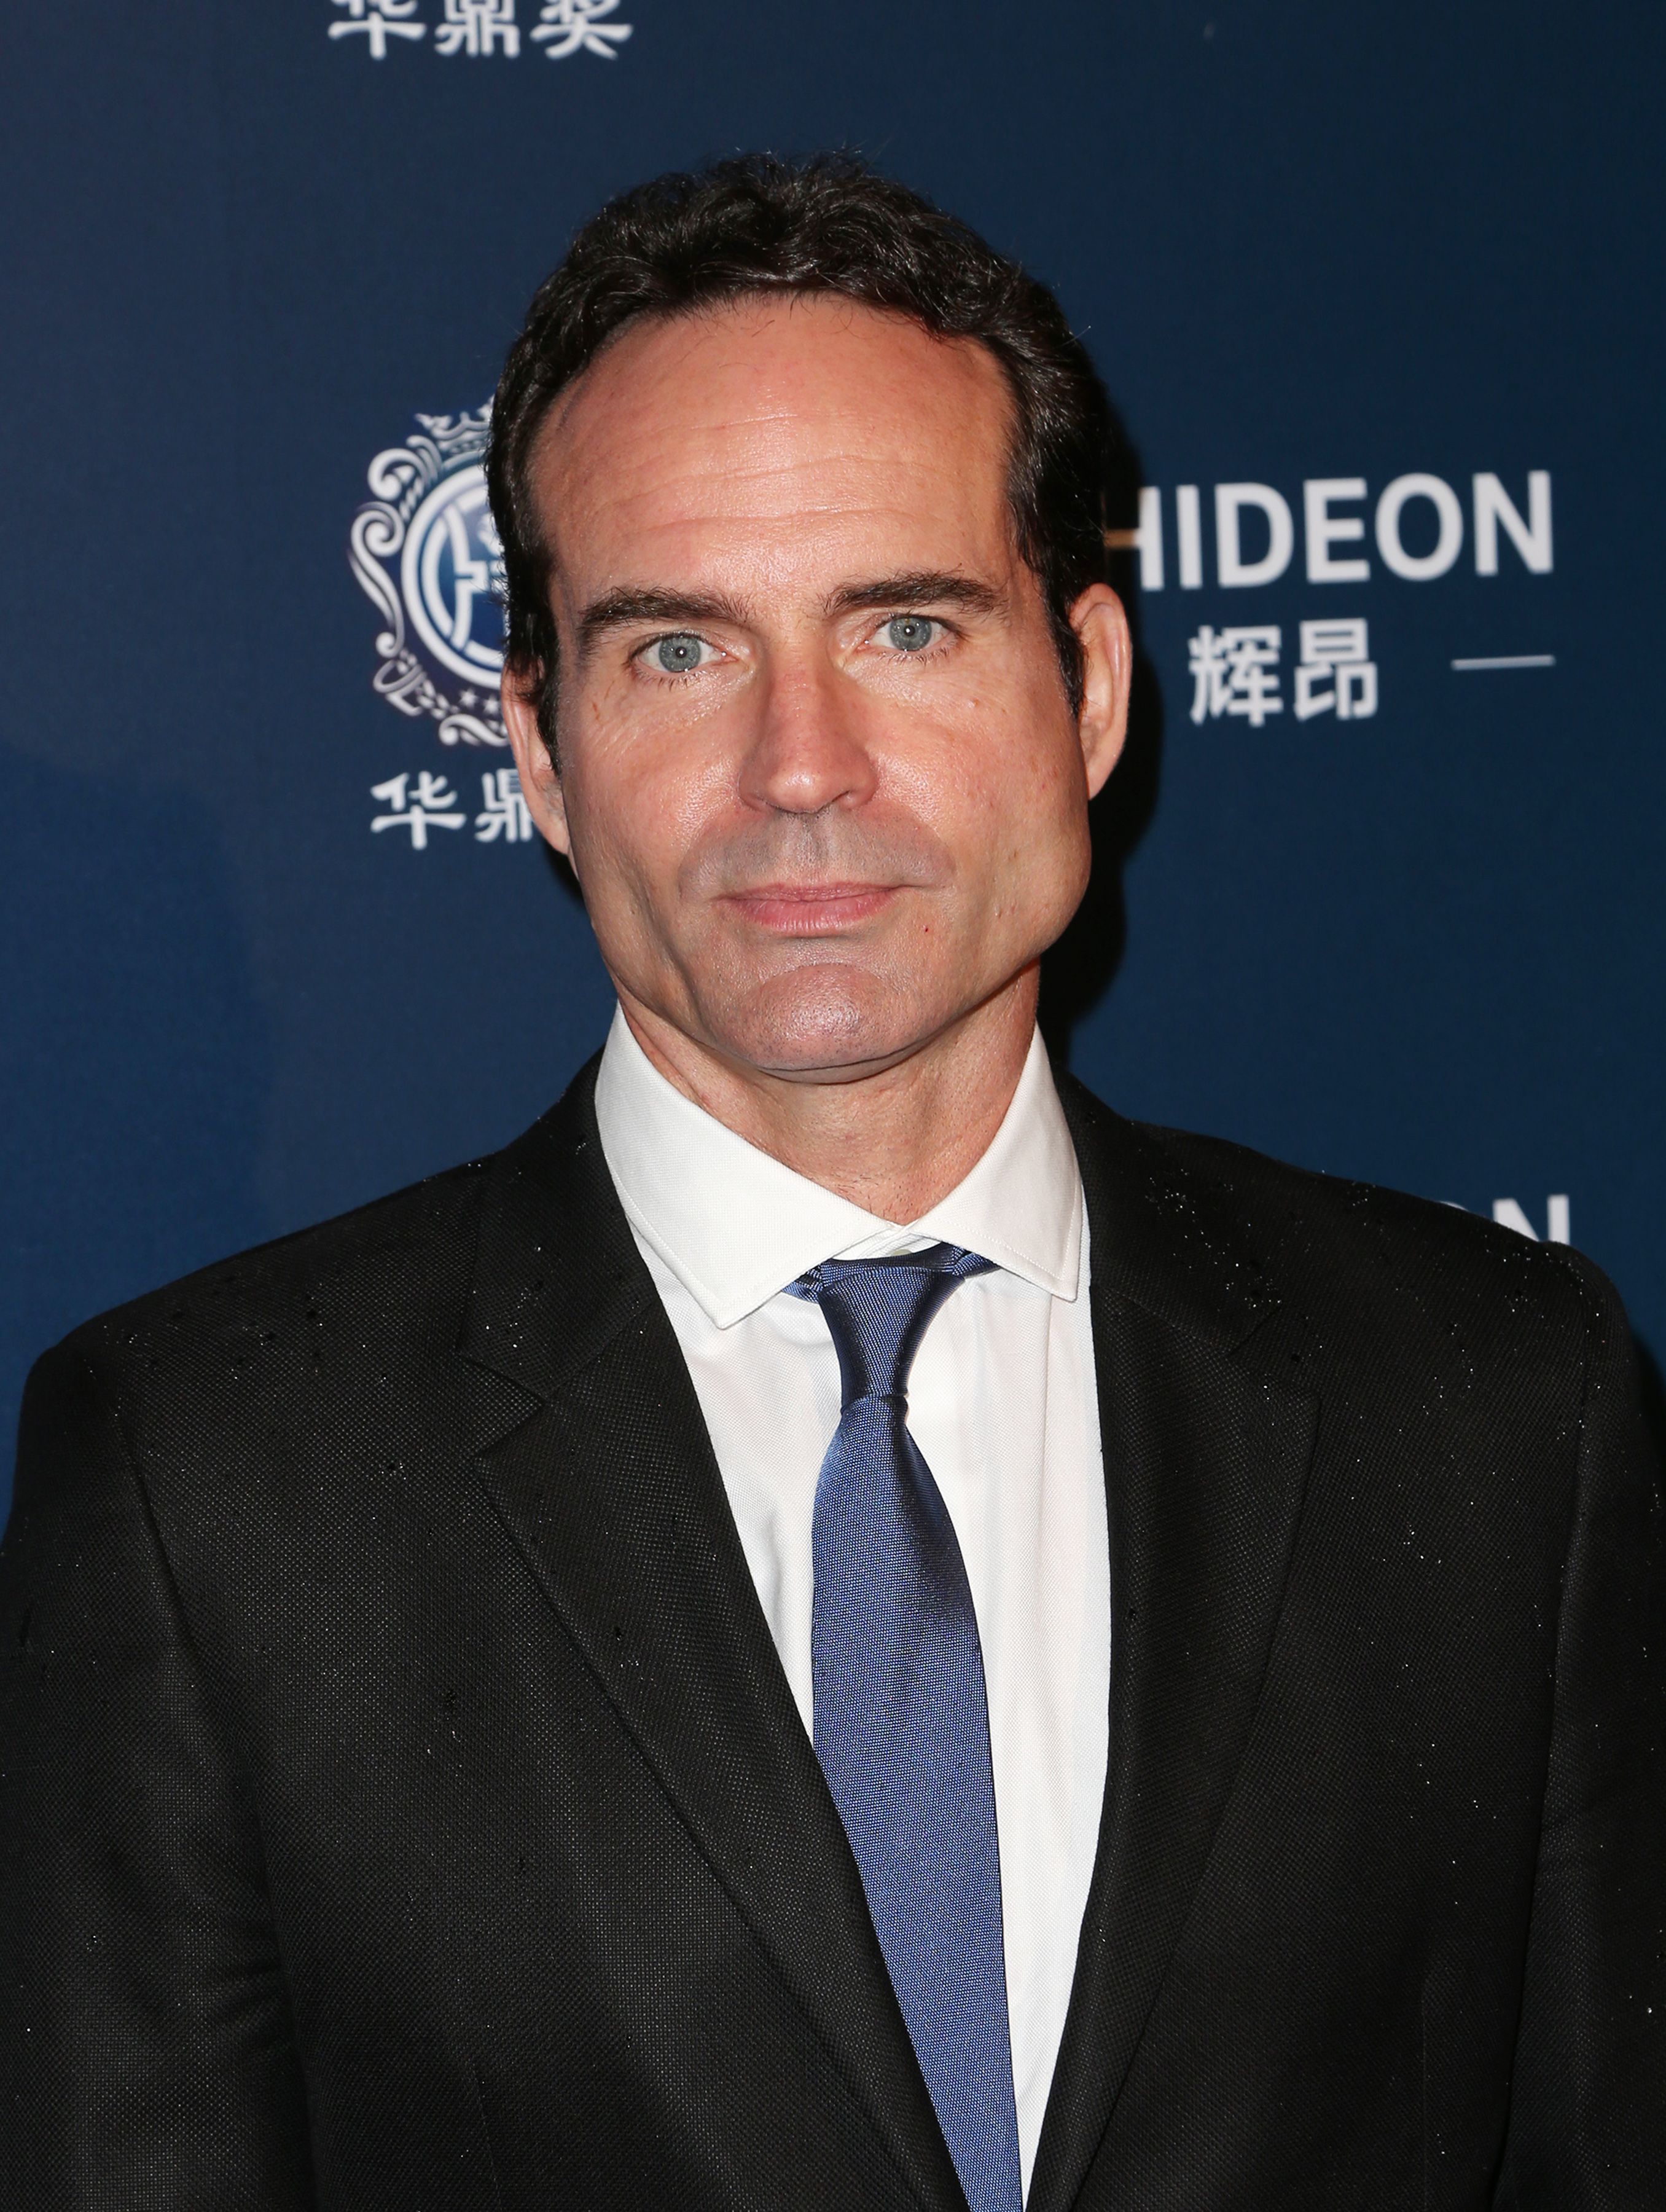 James Patric poses at a premiere